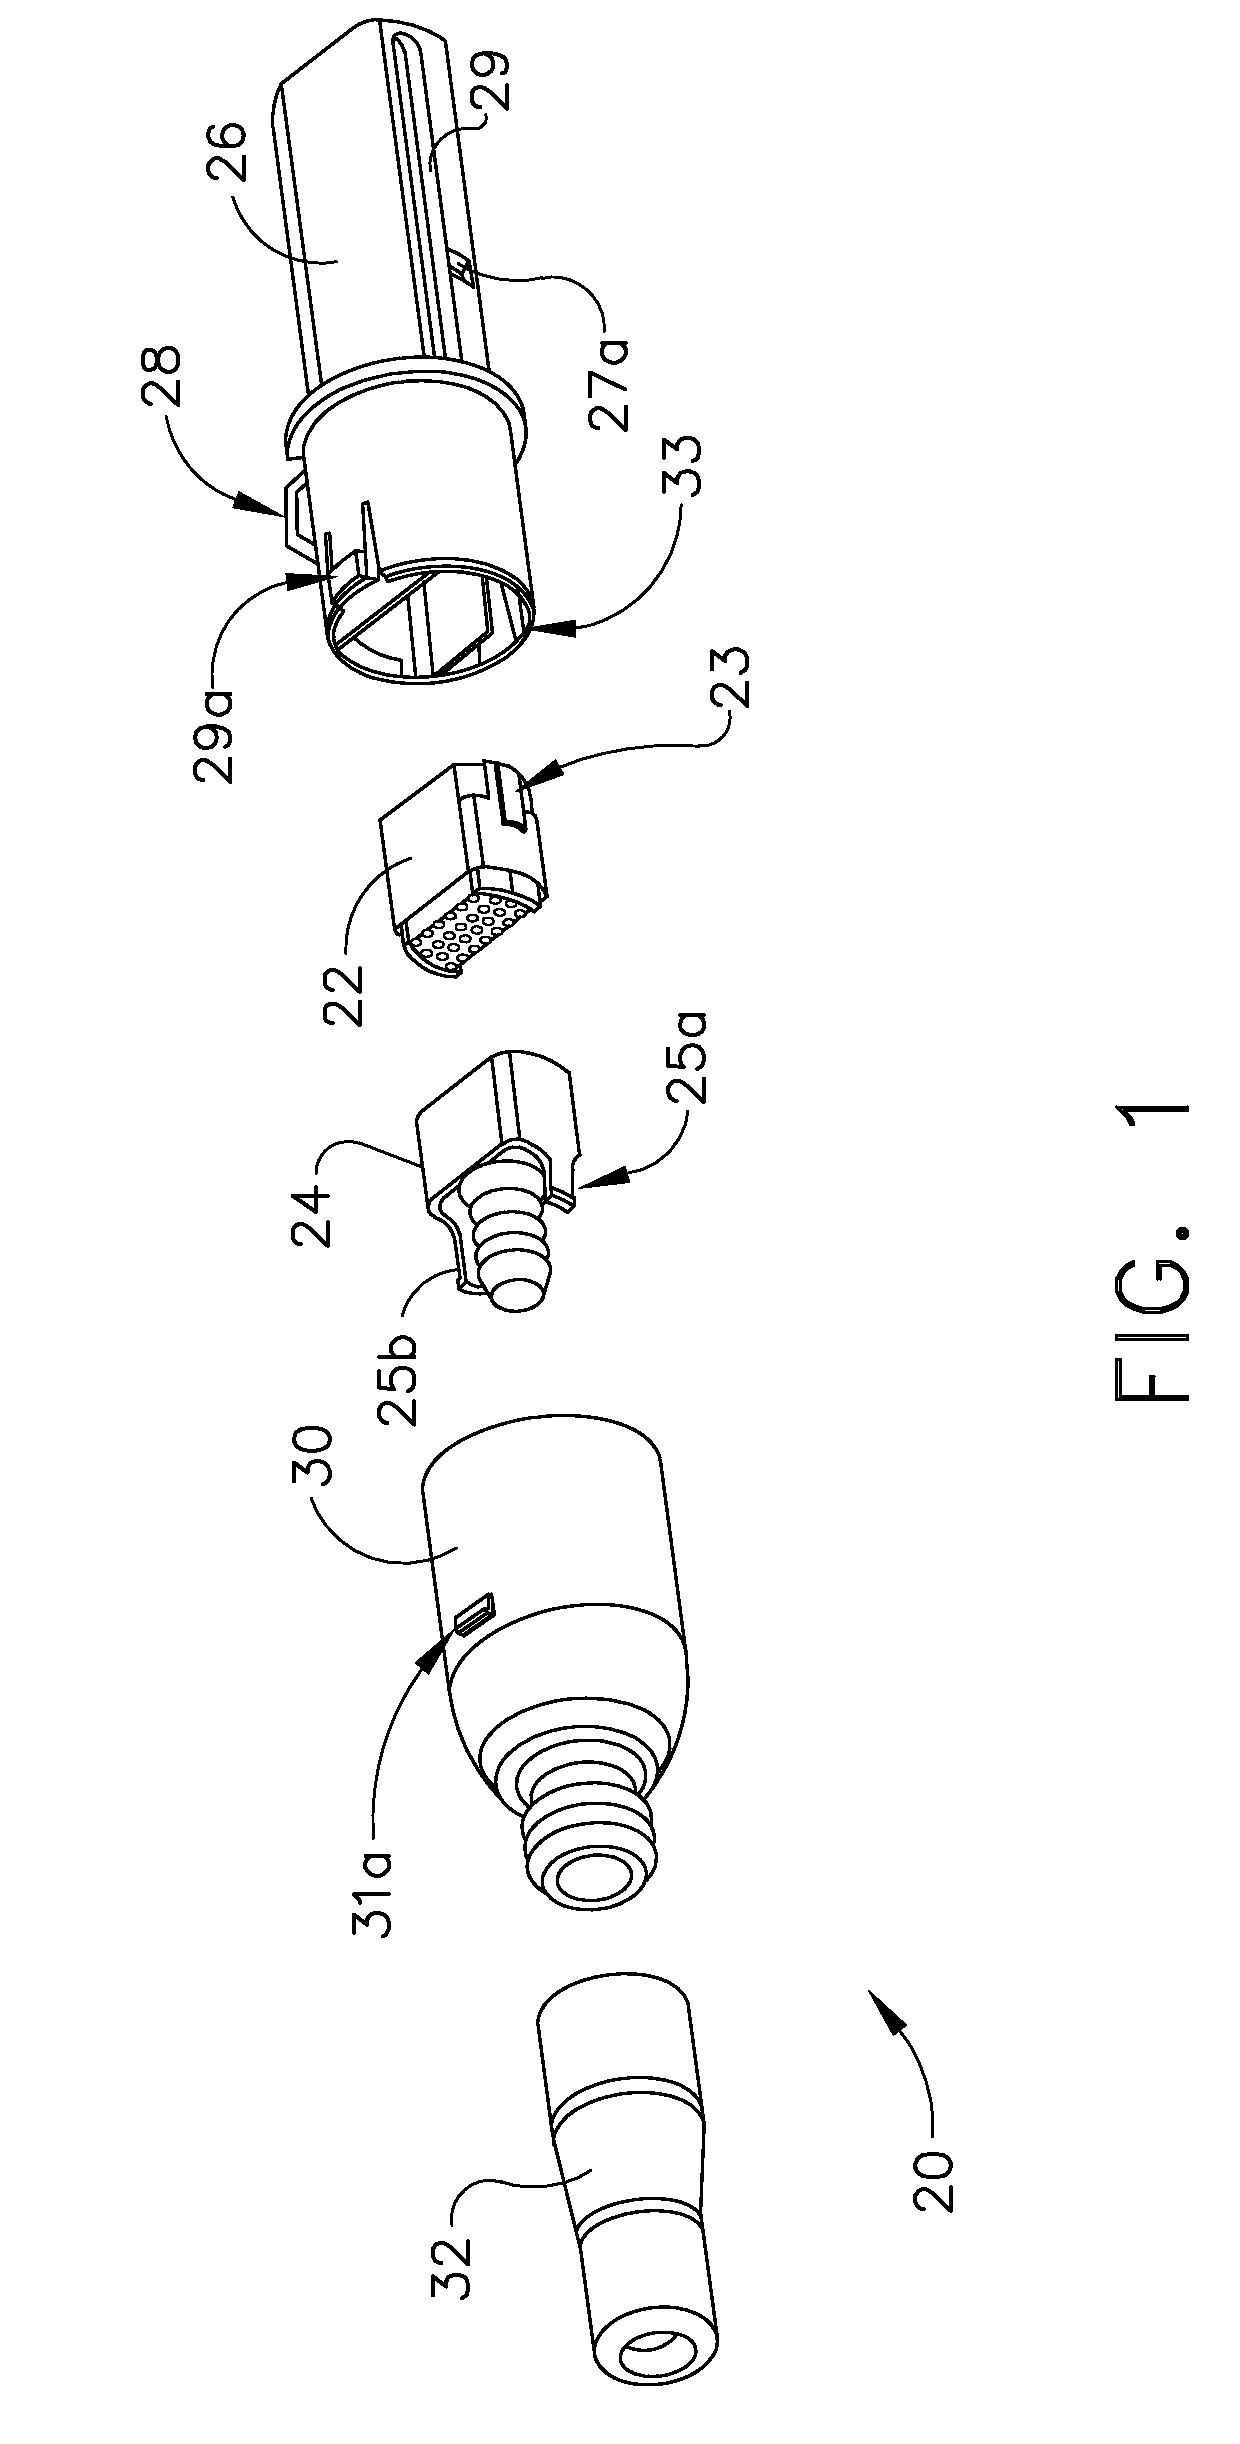 Catheter having two-piece connector for a split handle assembly